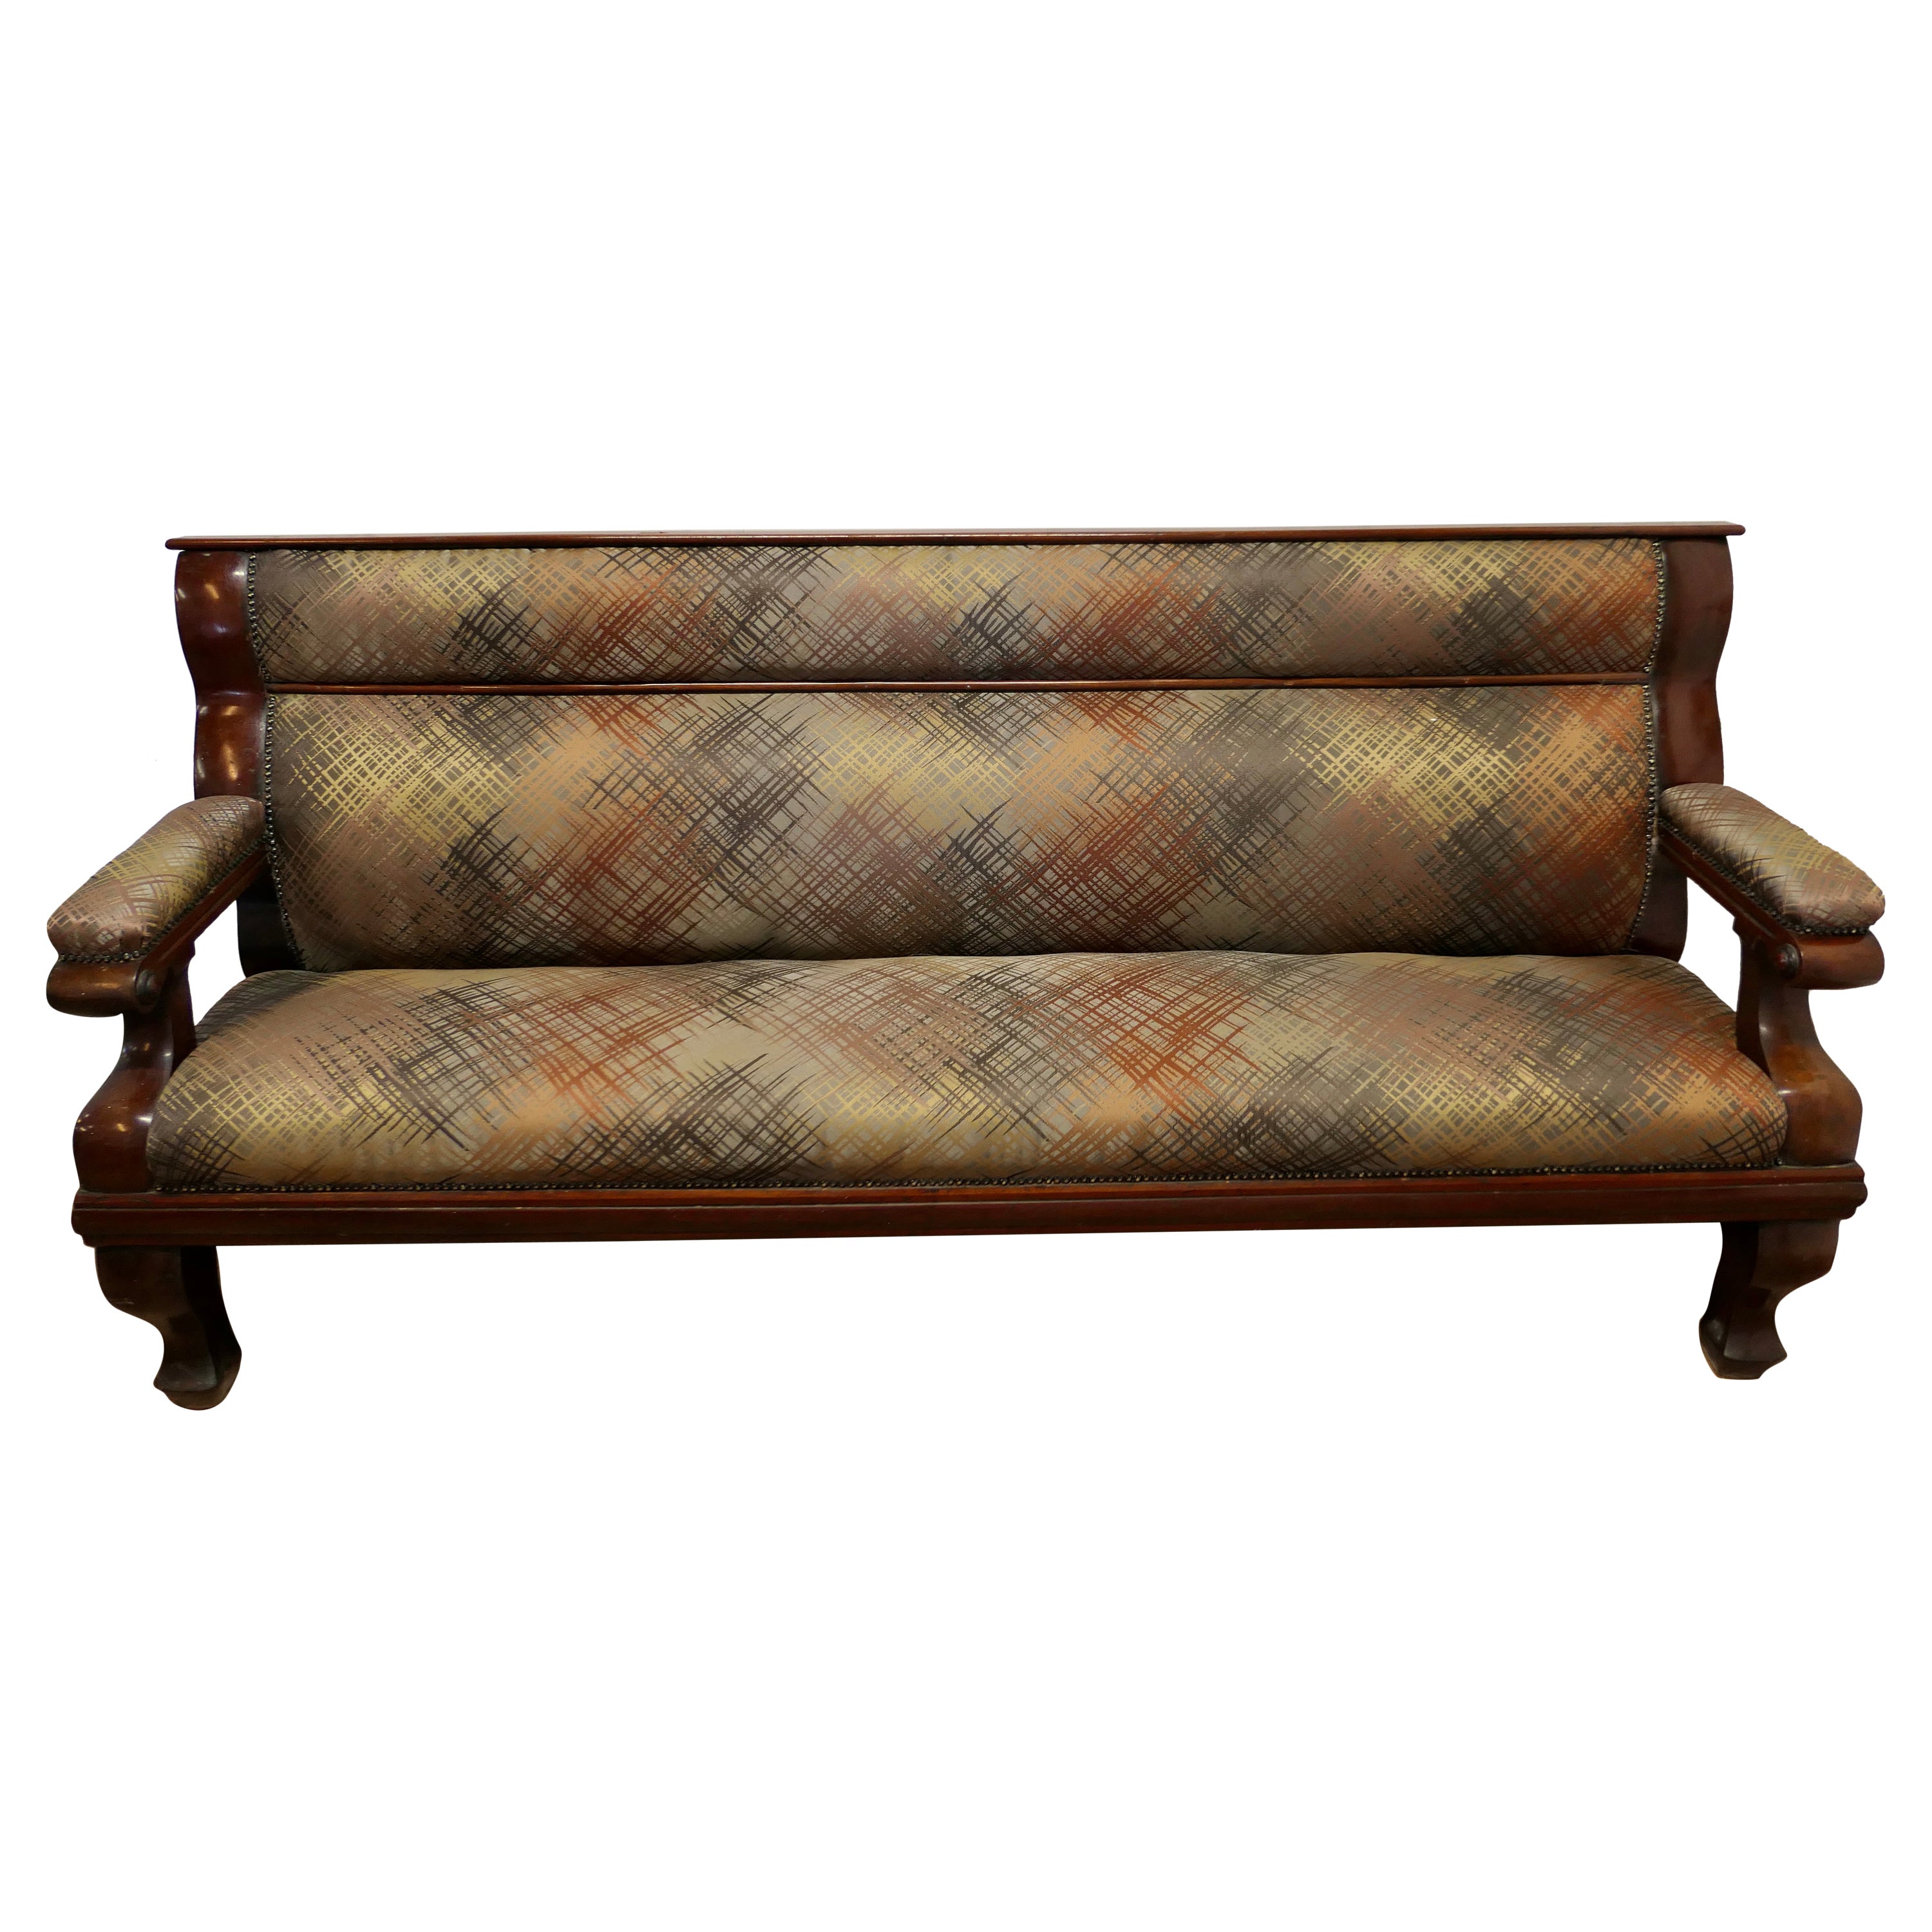 Long Waiting Room Seat or Hall Bench This Is a Very Sturdy and Heavy Piece  For Sale